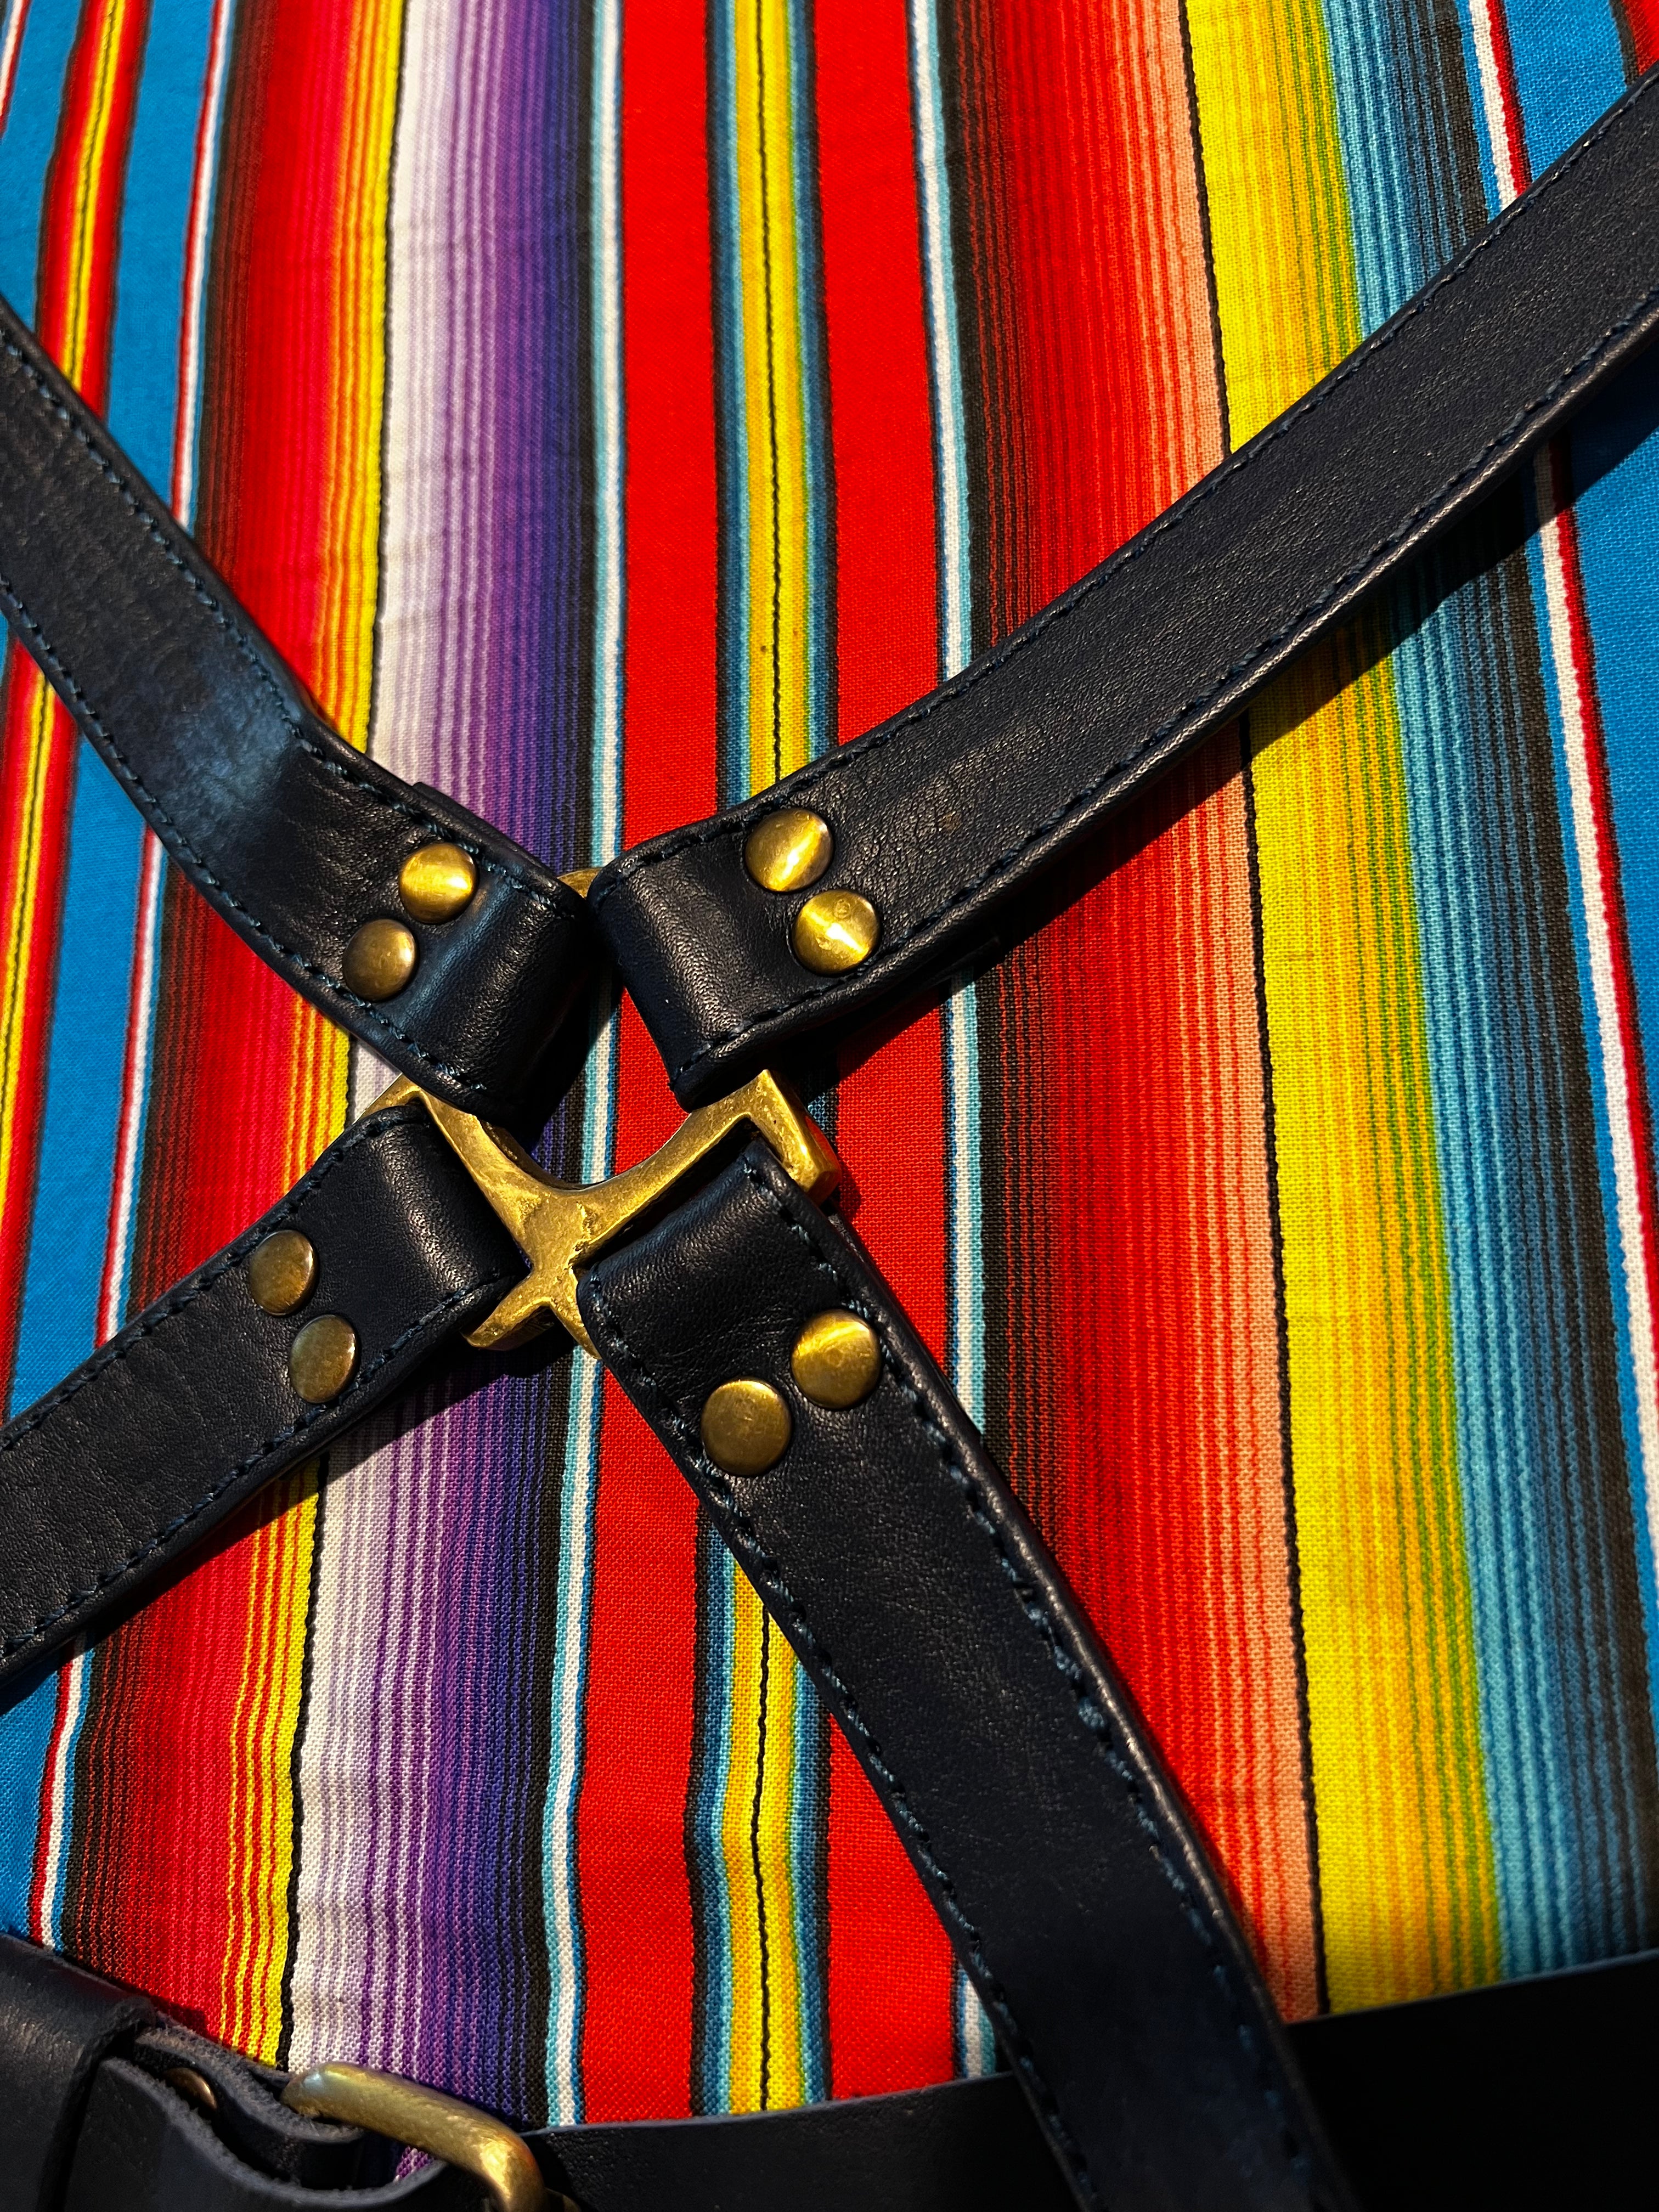 Brown Leather Apron - Striped Mexican